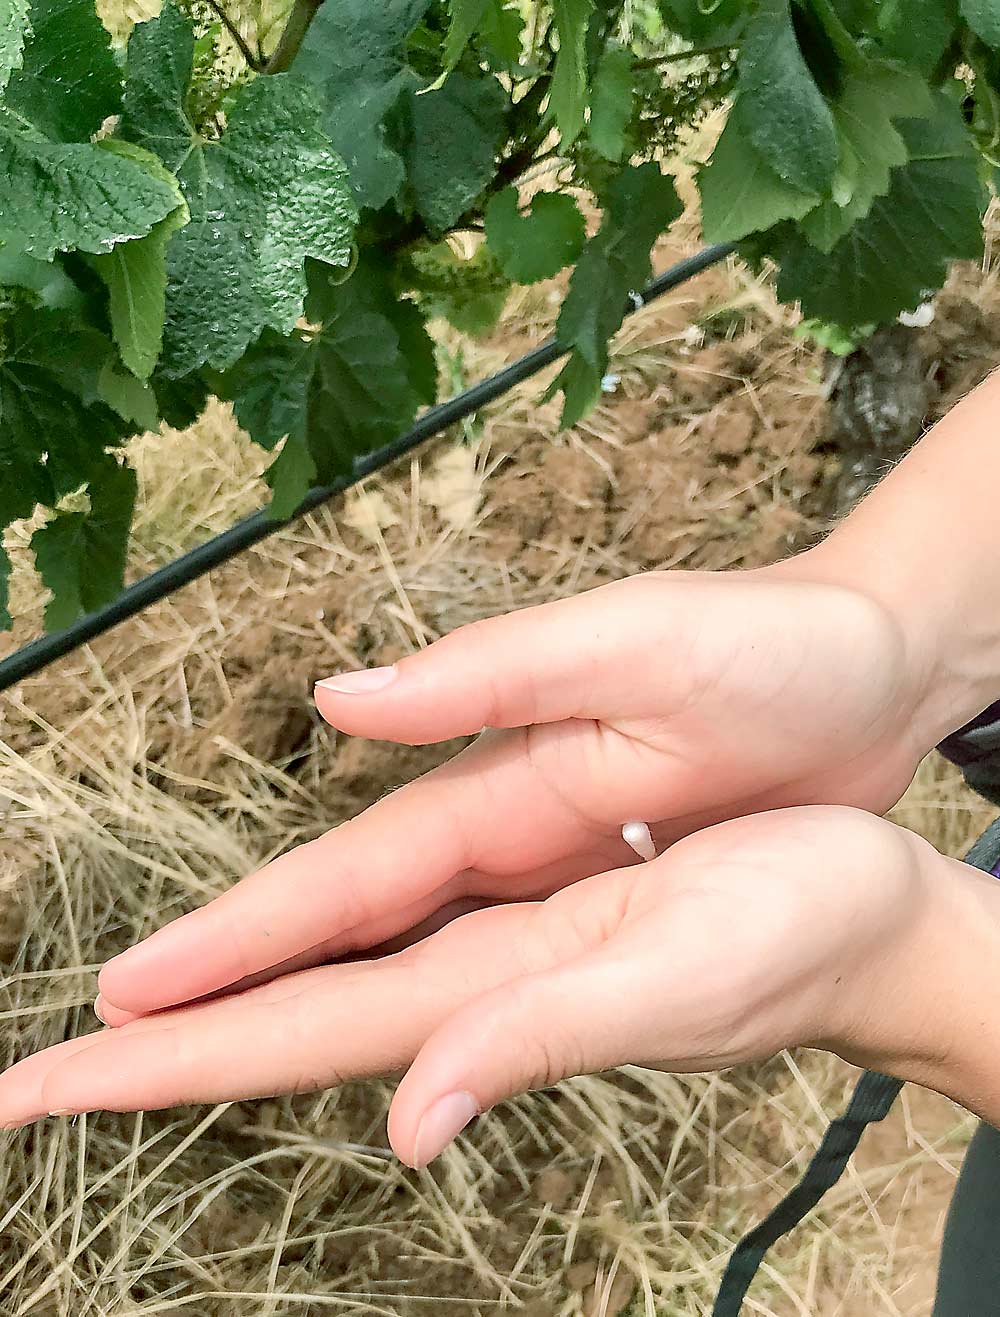 After running your hands across vines and leaves, rubbing them with a swab captures a sufficient sample of pathogens present in the vineyard. The swabs are sent to a lab equipped with rapid DNA testing. (Courtesy Sarah Lowder/University of Georgia)